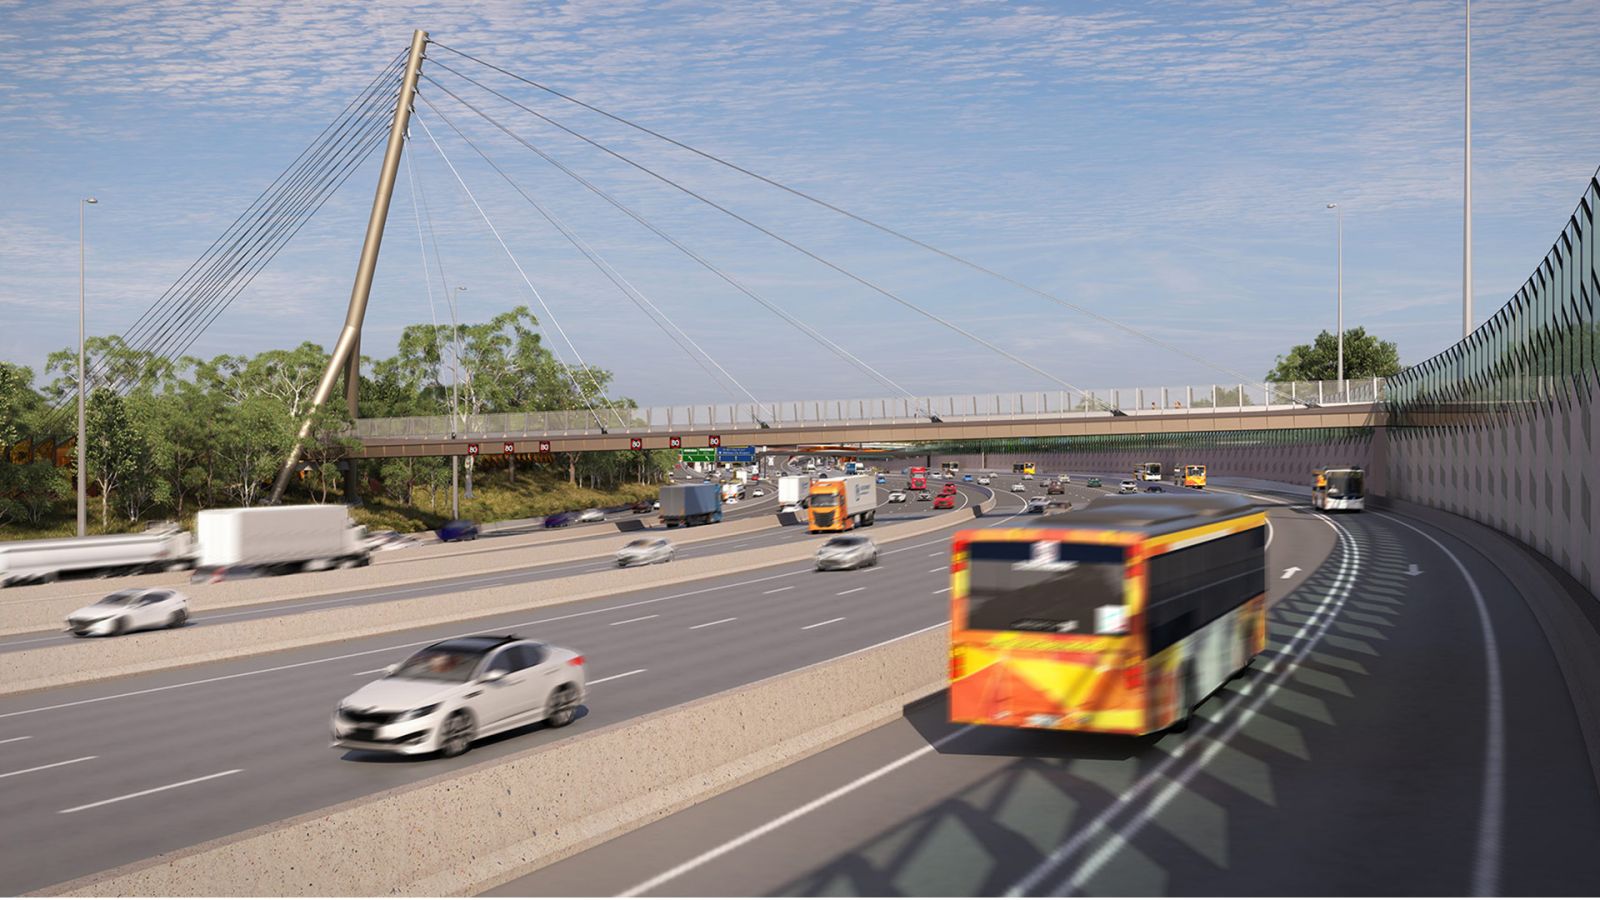 Artist impression of the Eastern Freeway with dedicated bus lanes on one side and other traffic travelling on the other side, with a concrete and glass bridge going over the freeway.